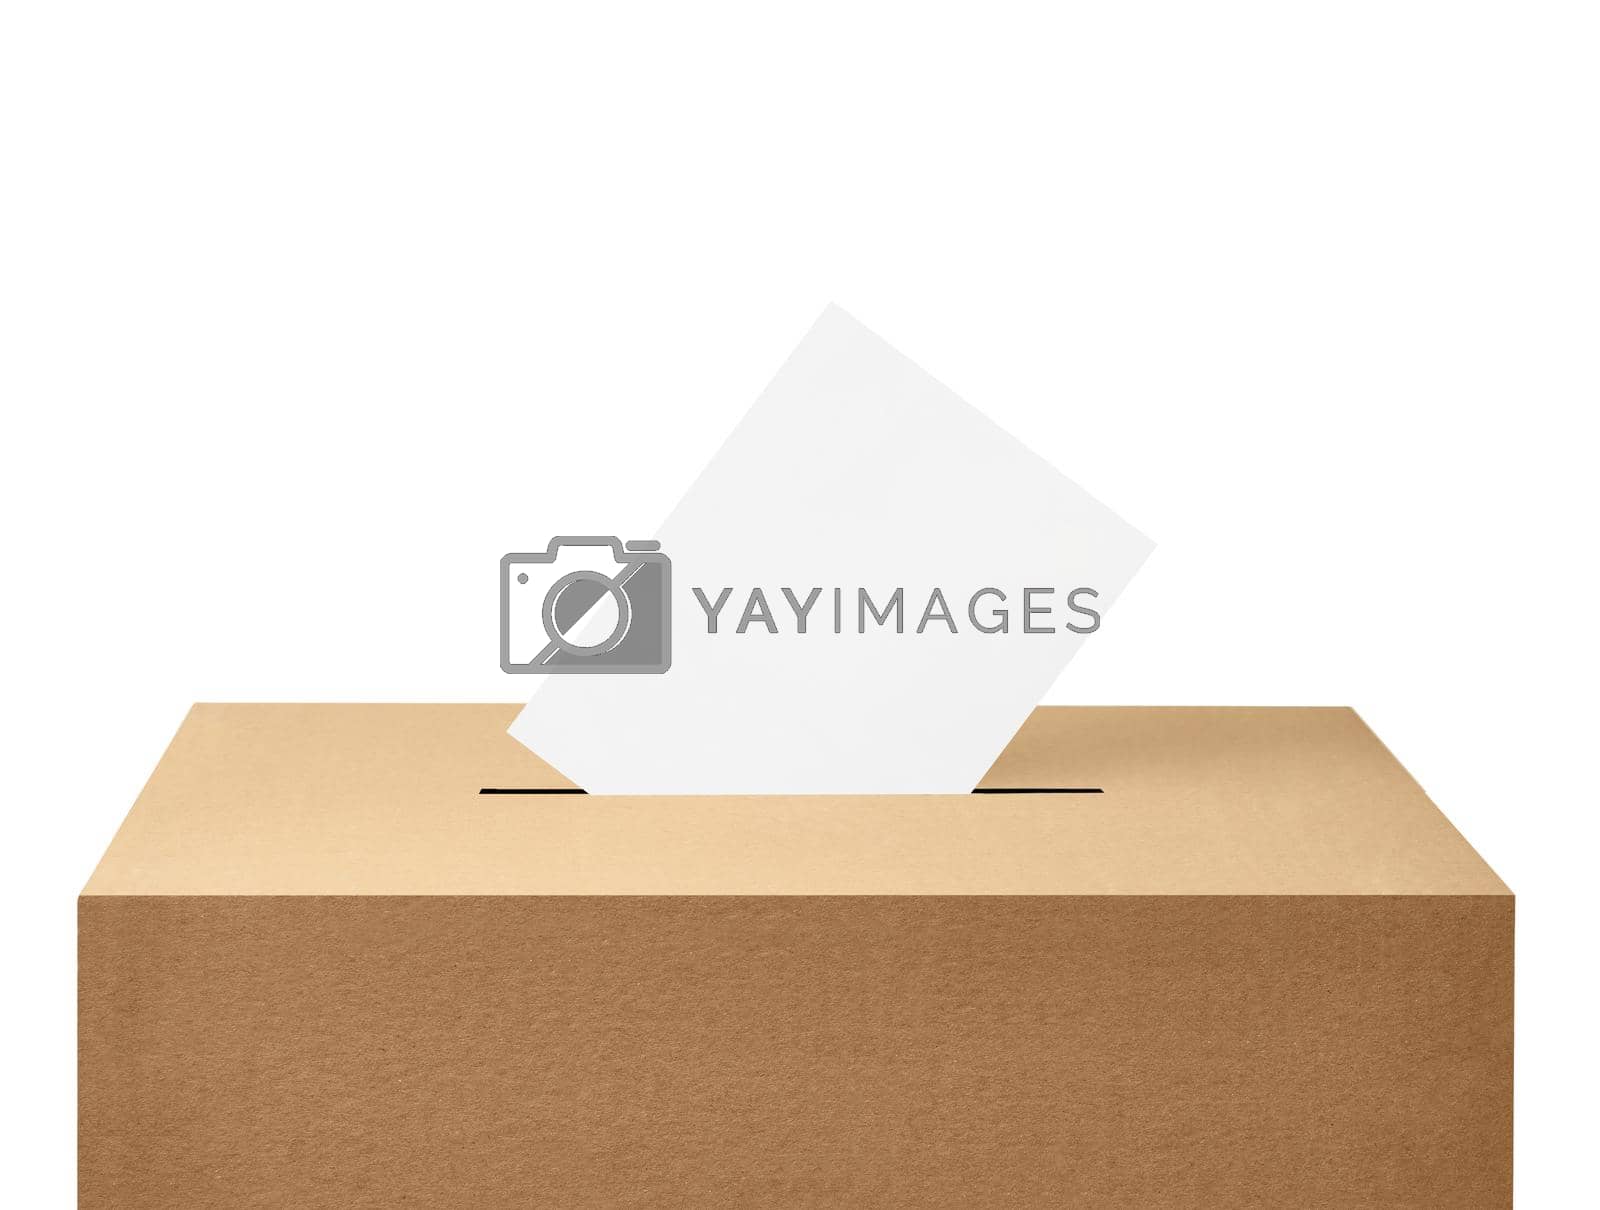 Royalty free image of ballot box casting vote election referendum politics elect woman female democracy hand voter flying air by Picsfive